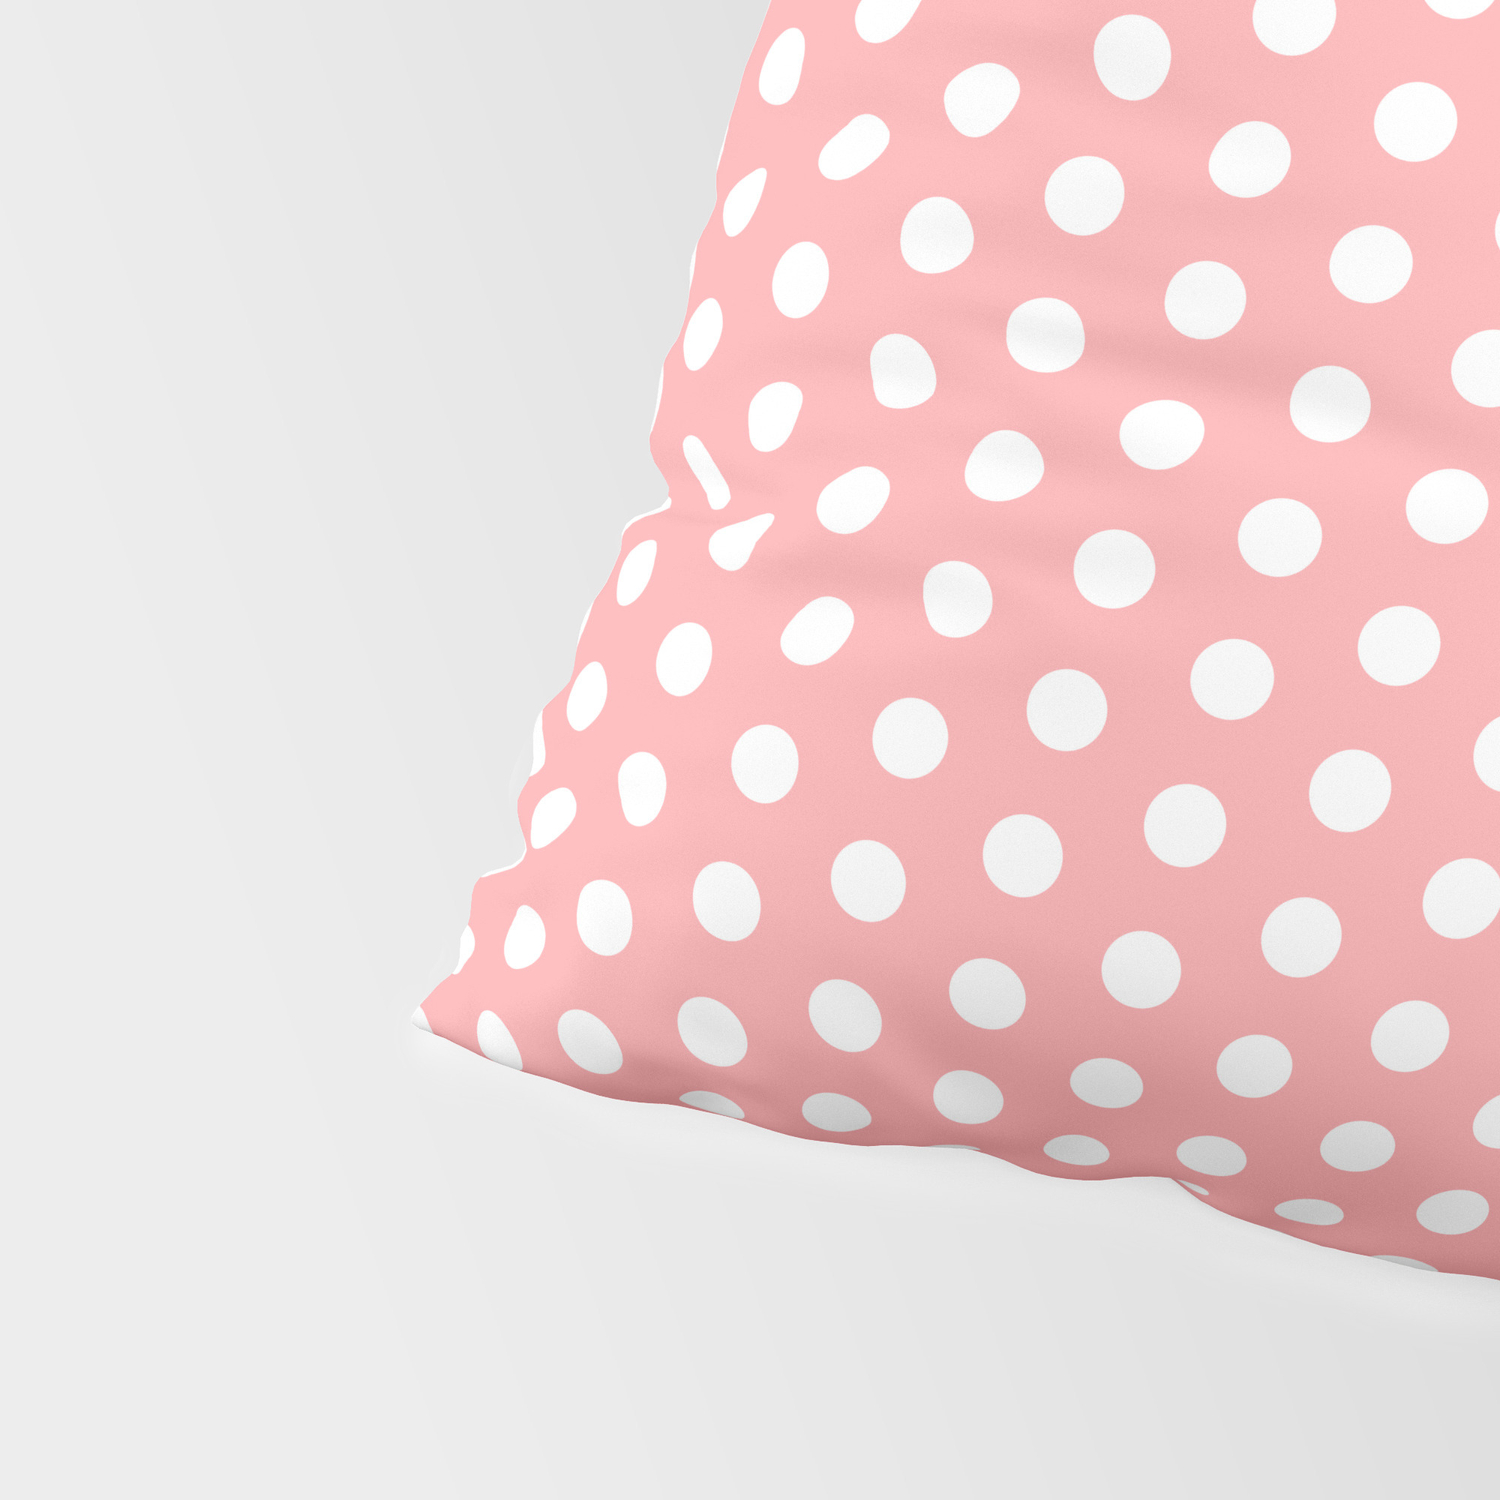 Society6 Pink & White Polka Dots by Christyne on Pillow Sham Cotton King Set of 2 